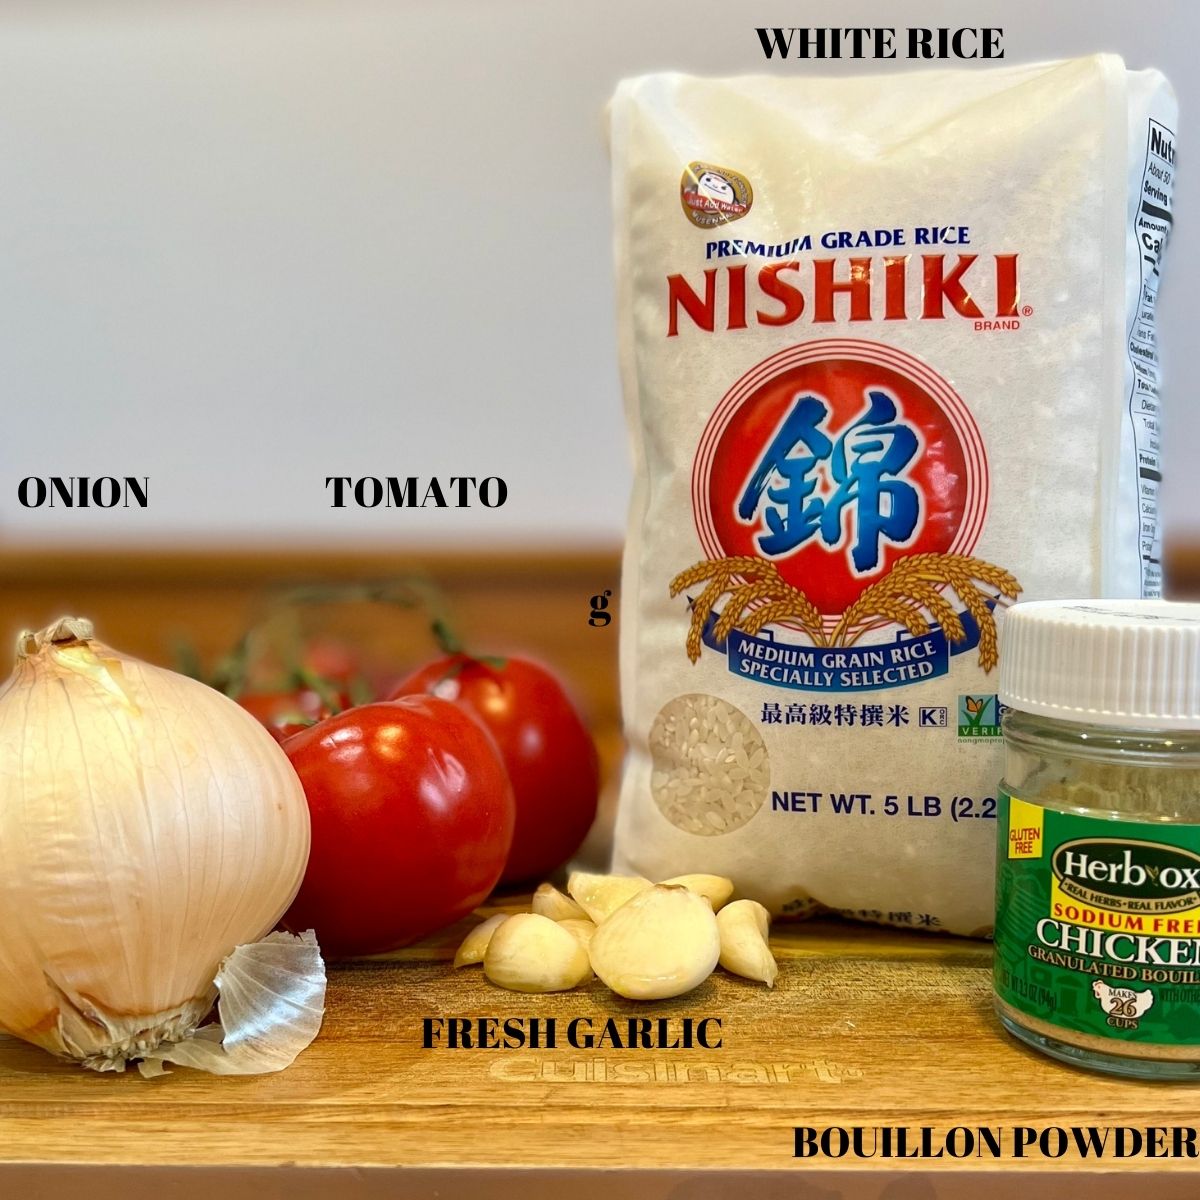 Ingredients for Arroz Rojas - White Rice, Onion,Tomatoes,garlic and bouillon powder on a wooden cutting board